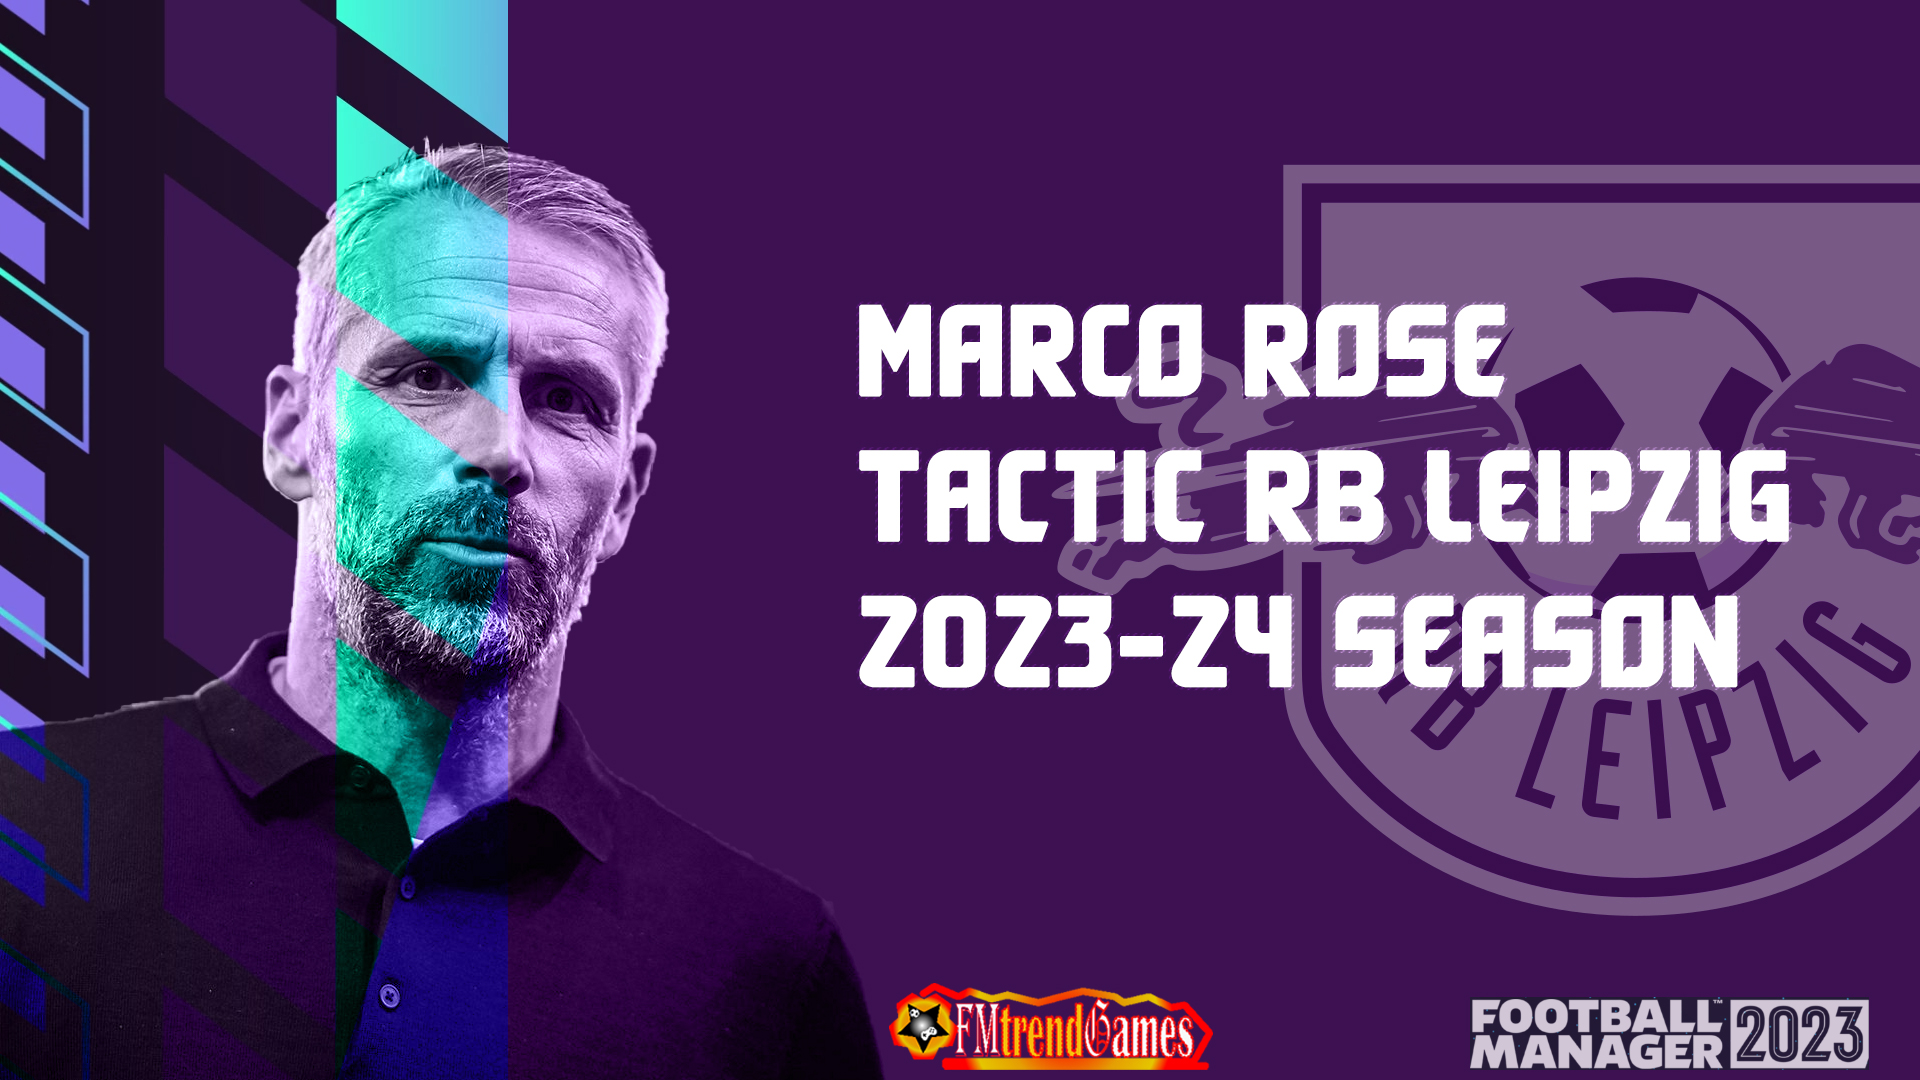 Marco Rose 4-2-2-2 Tactic with RB Leipzig fm23 ]2023-24 season